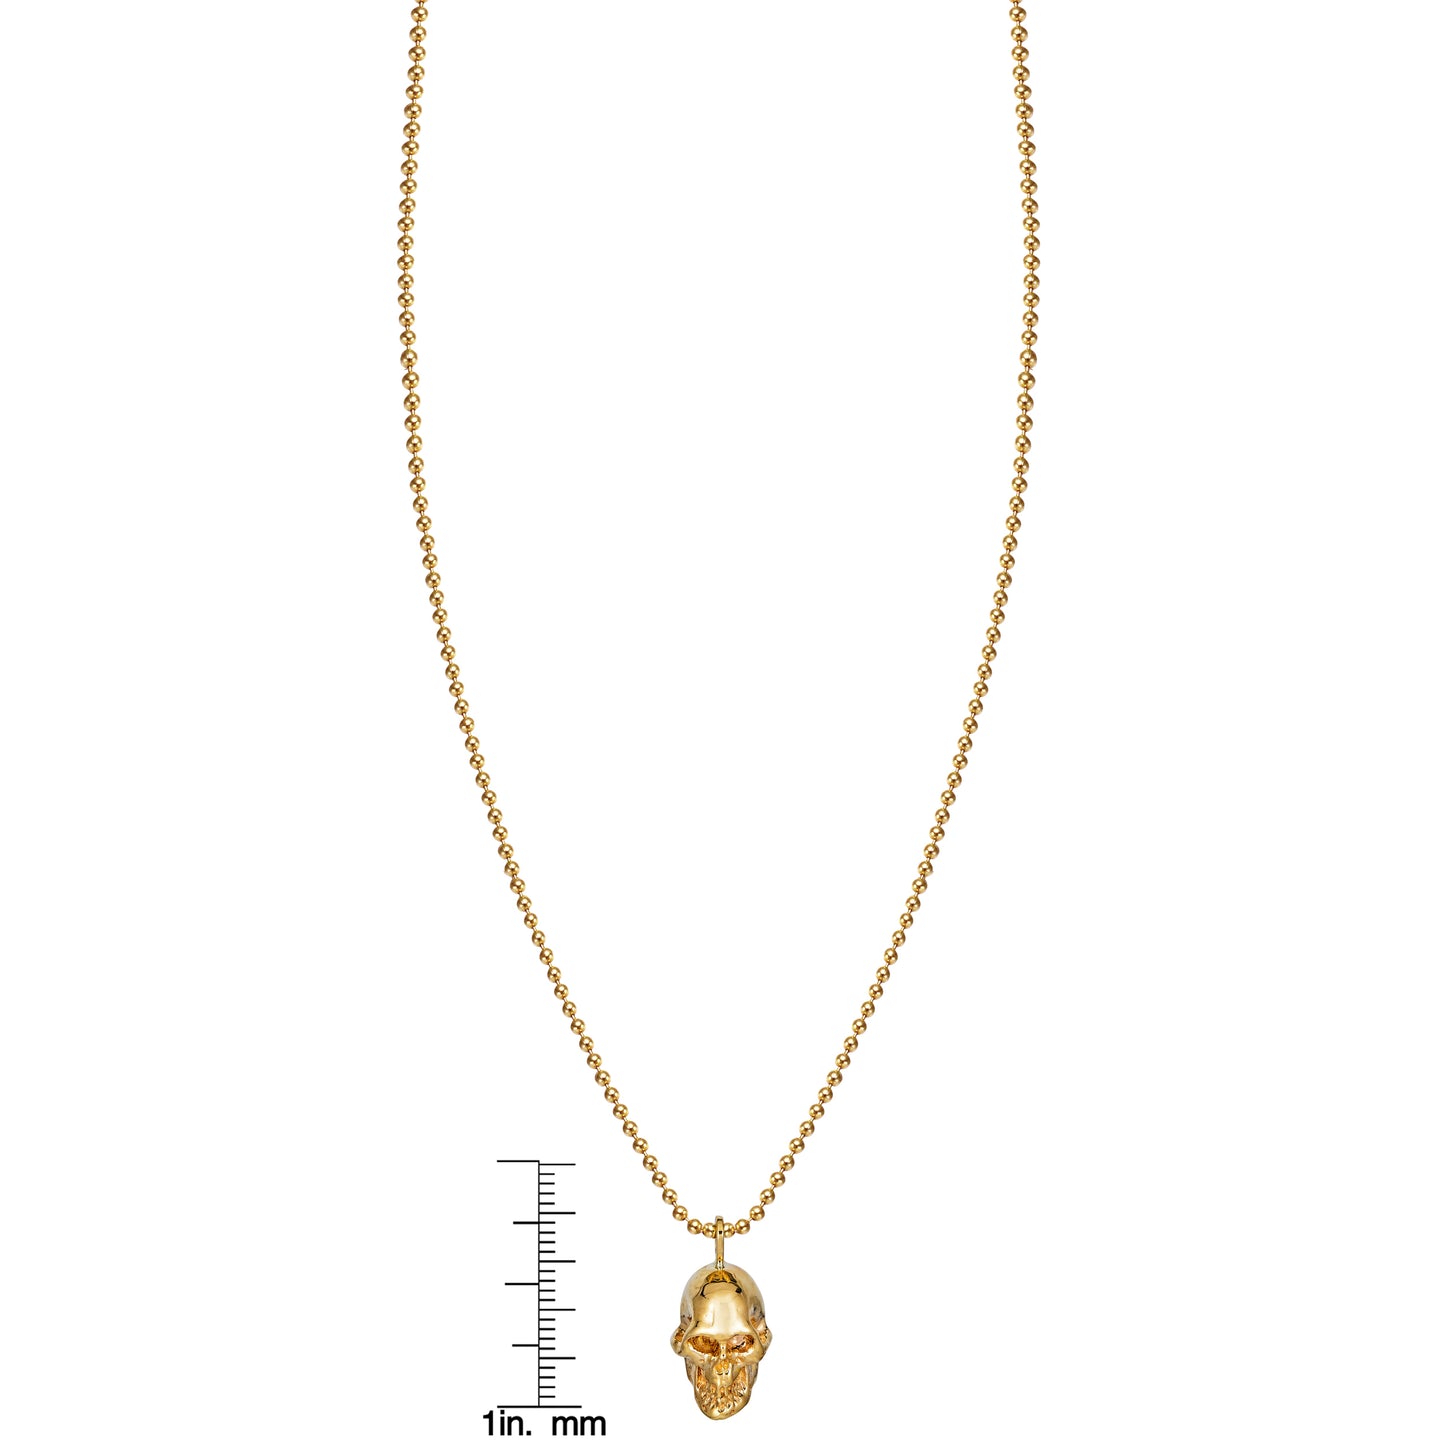 large gold skull necklace with ruler